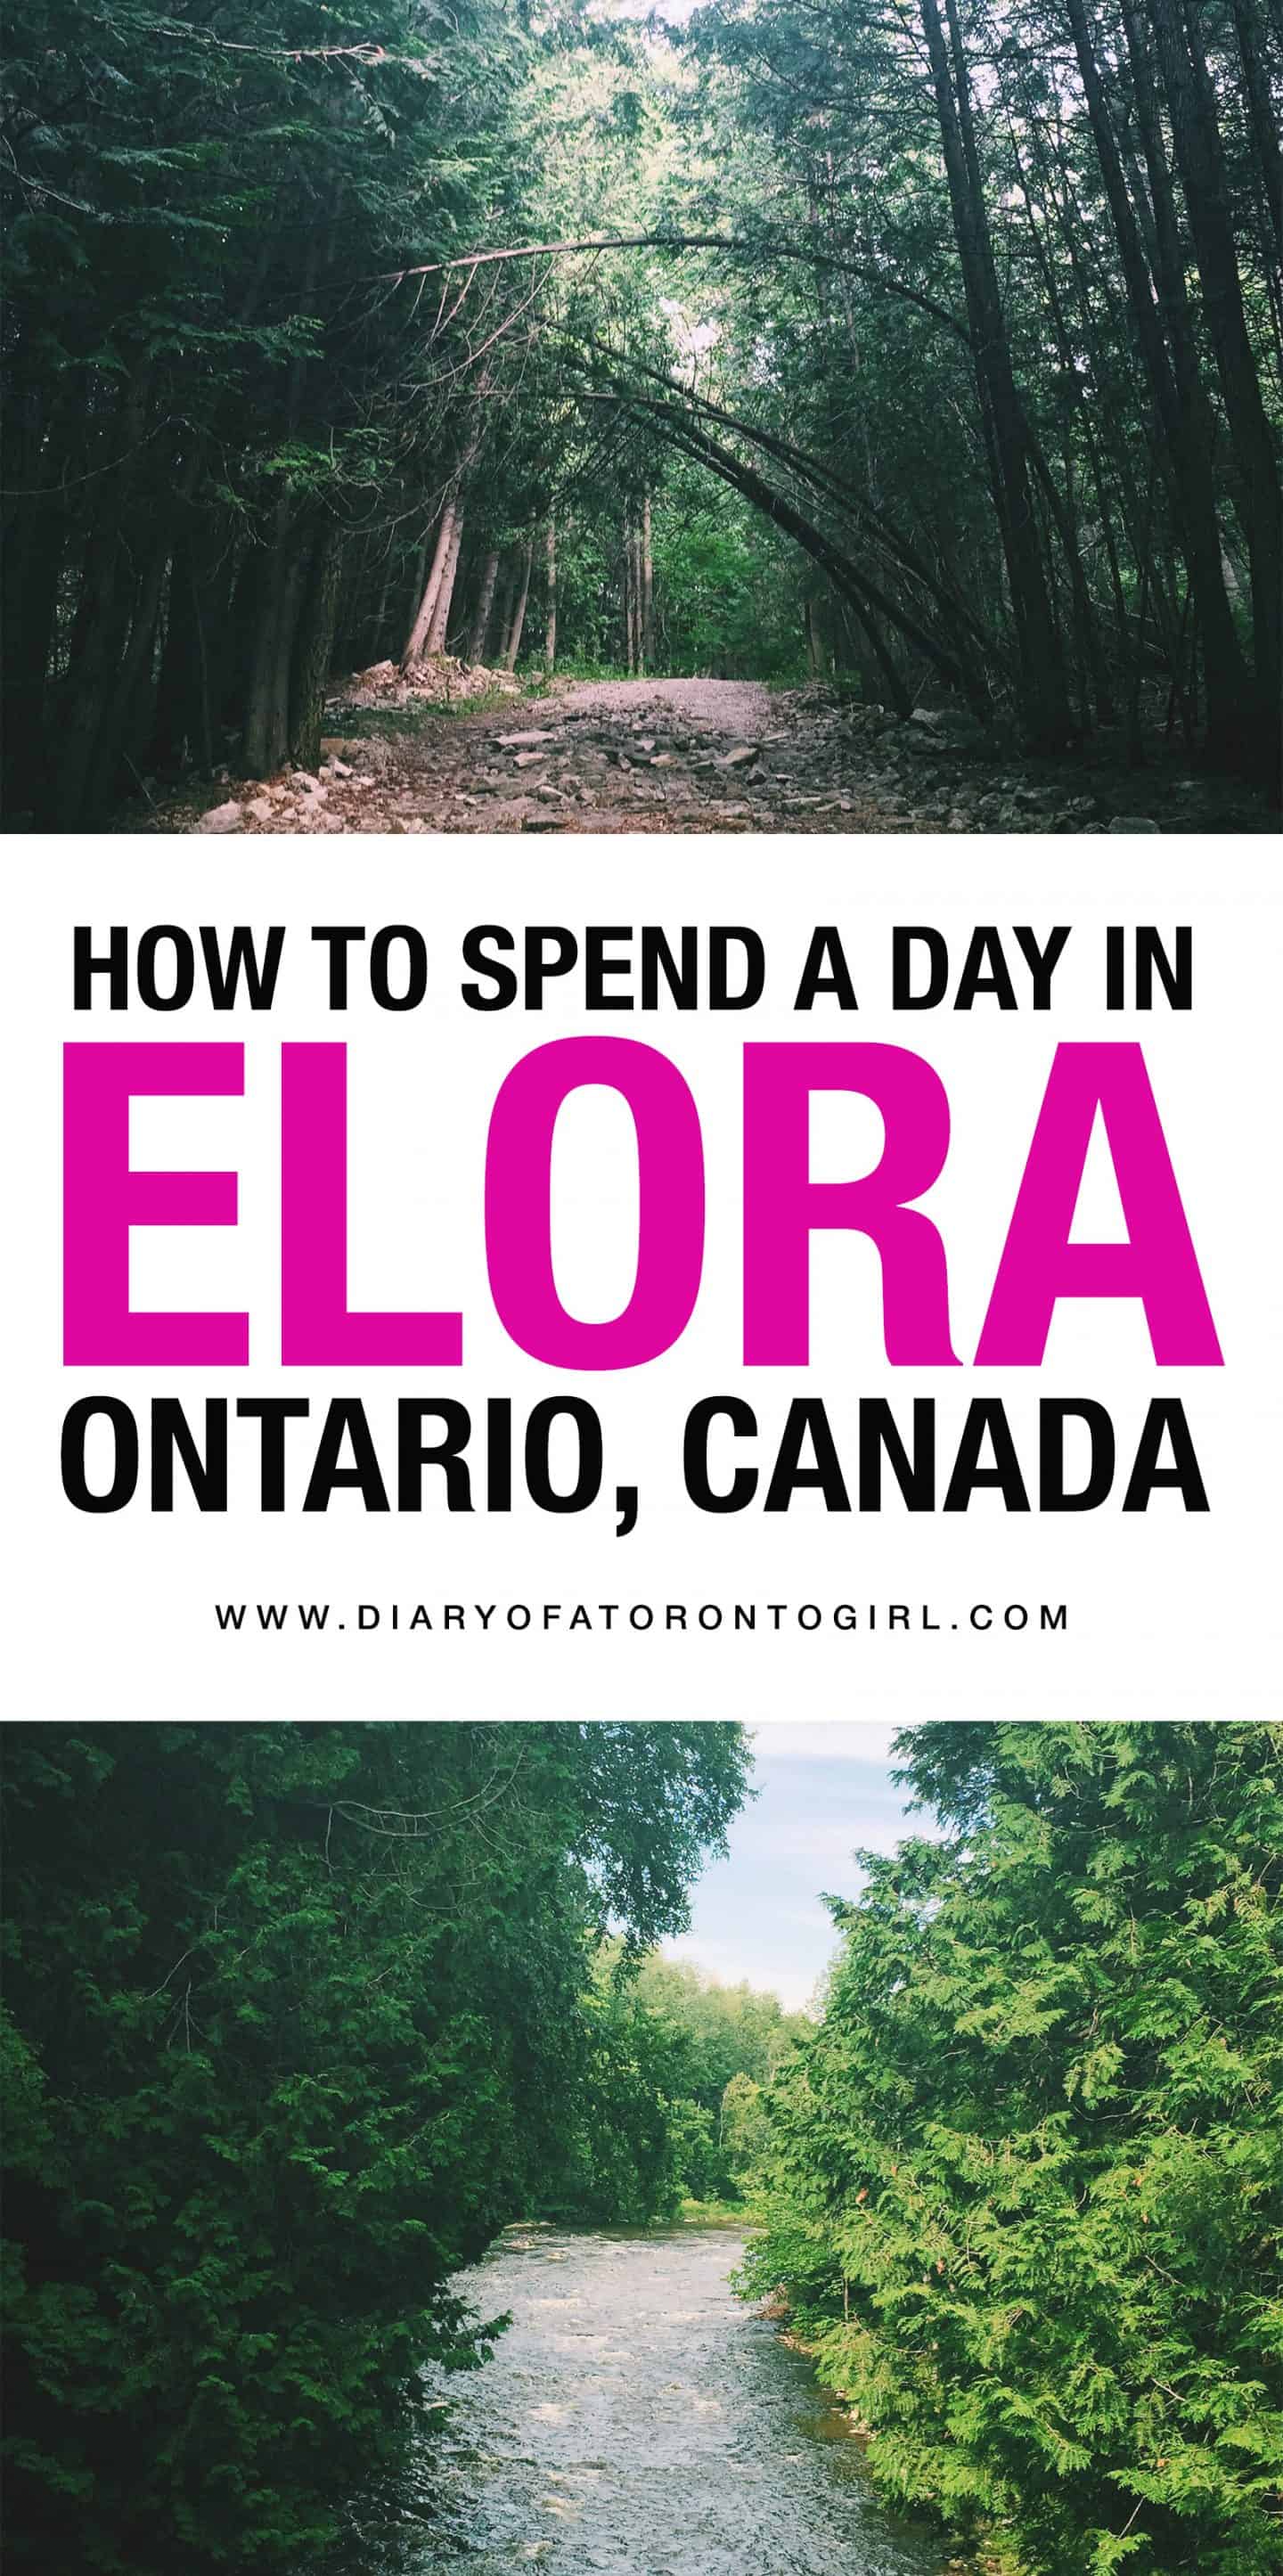 How to spend a perfect day tubing and hiking at the Elora Conservation Area in Elora, Ontario!